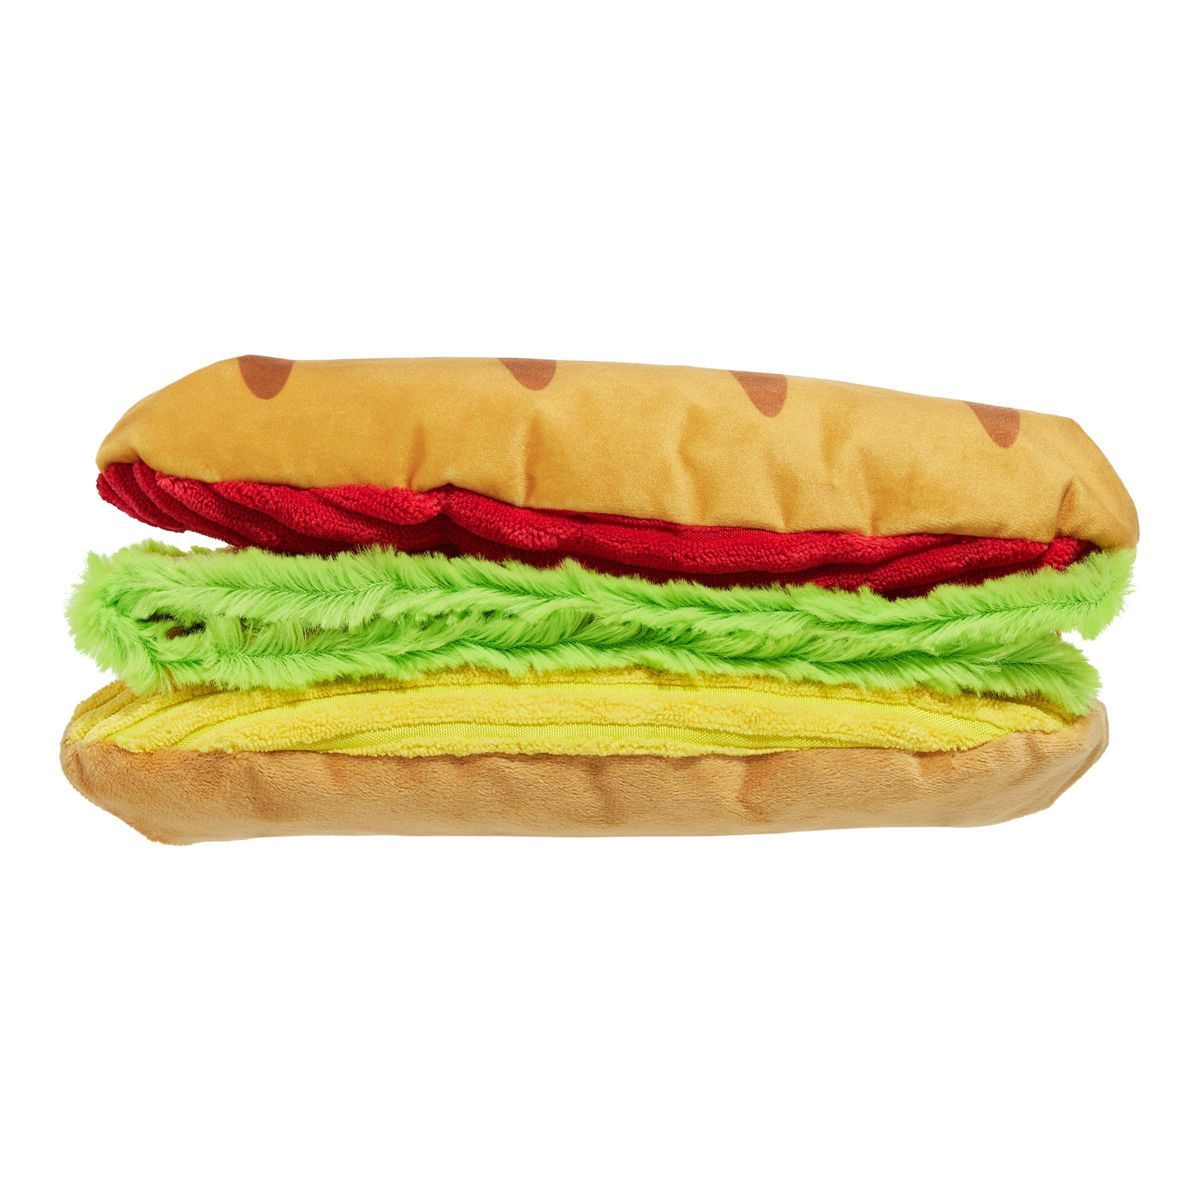 BARK Sandwich Doggy Delivery Dog Toy | Target